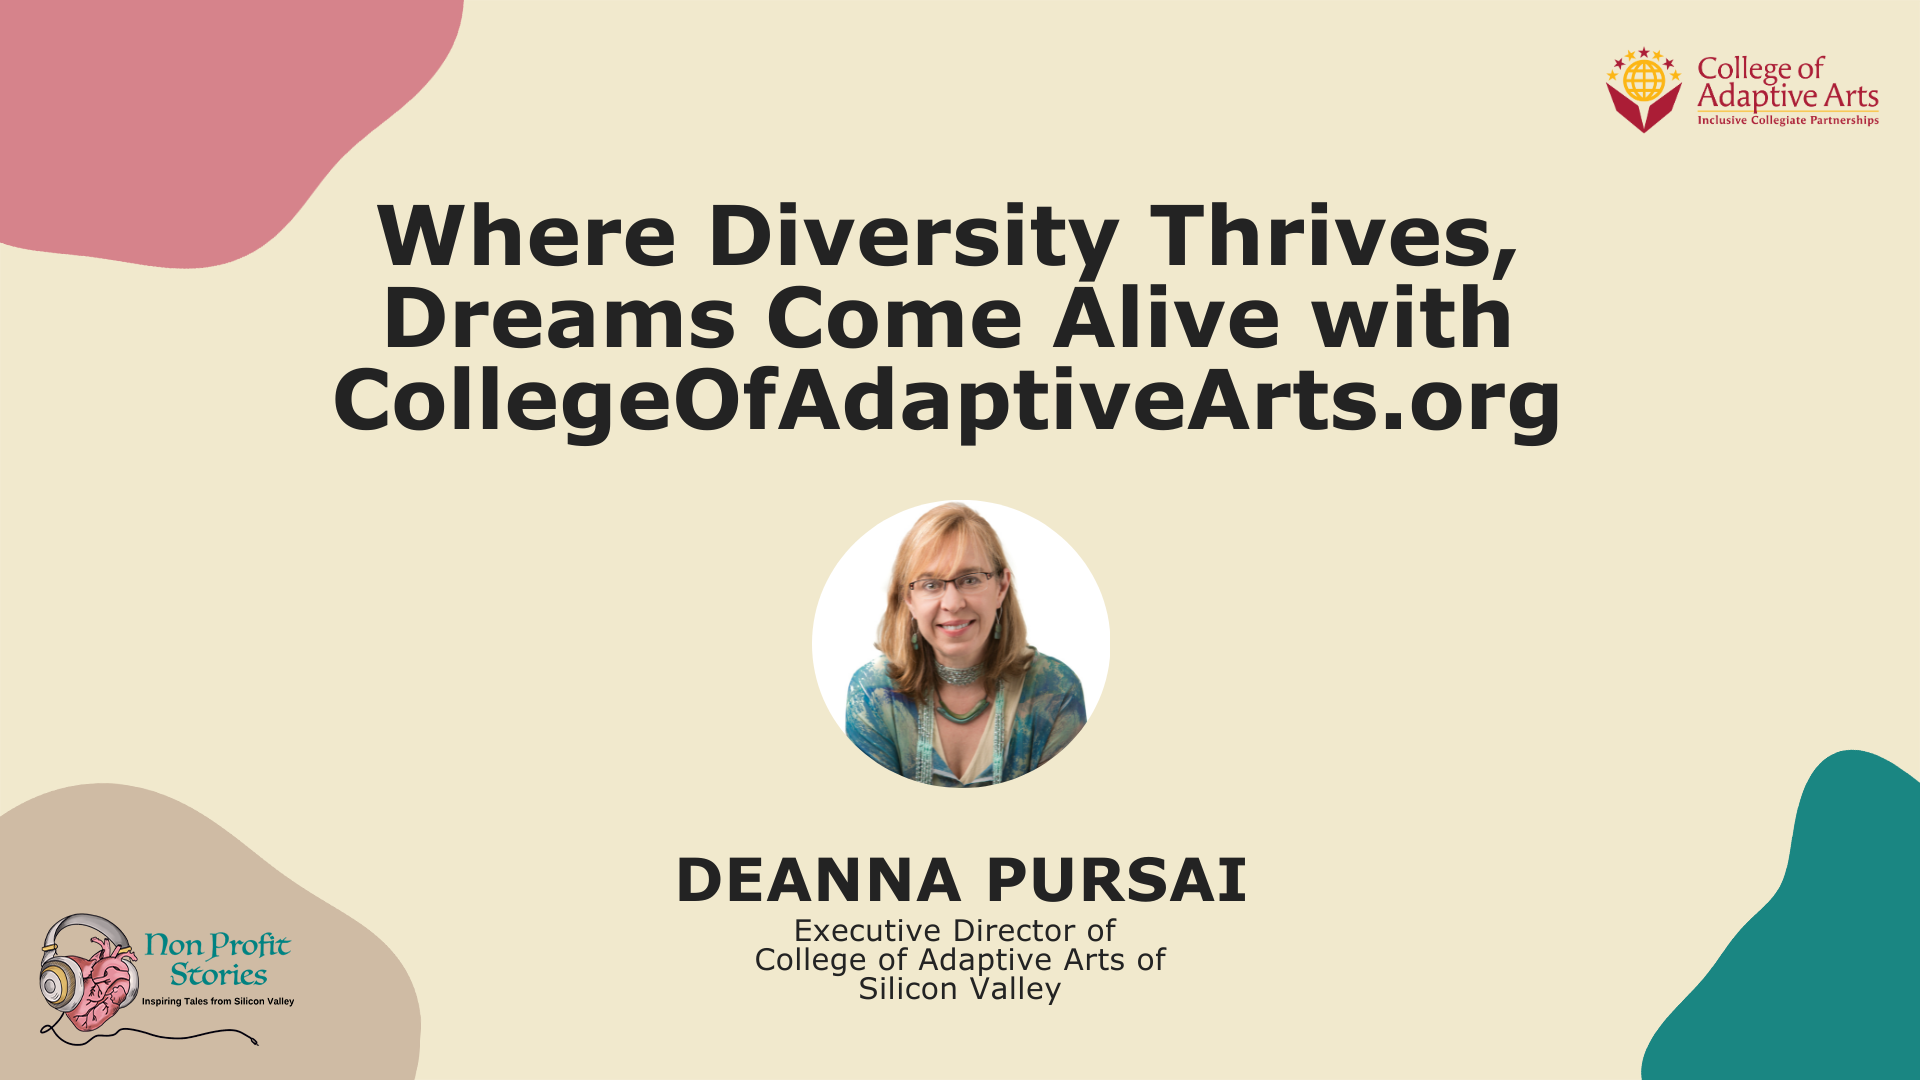 College of Adaptive Arts on Non-Profit Stories